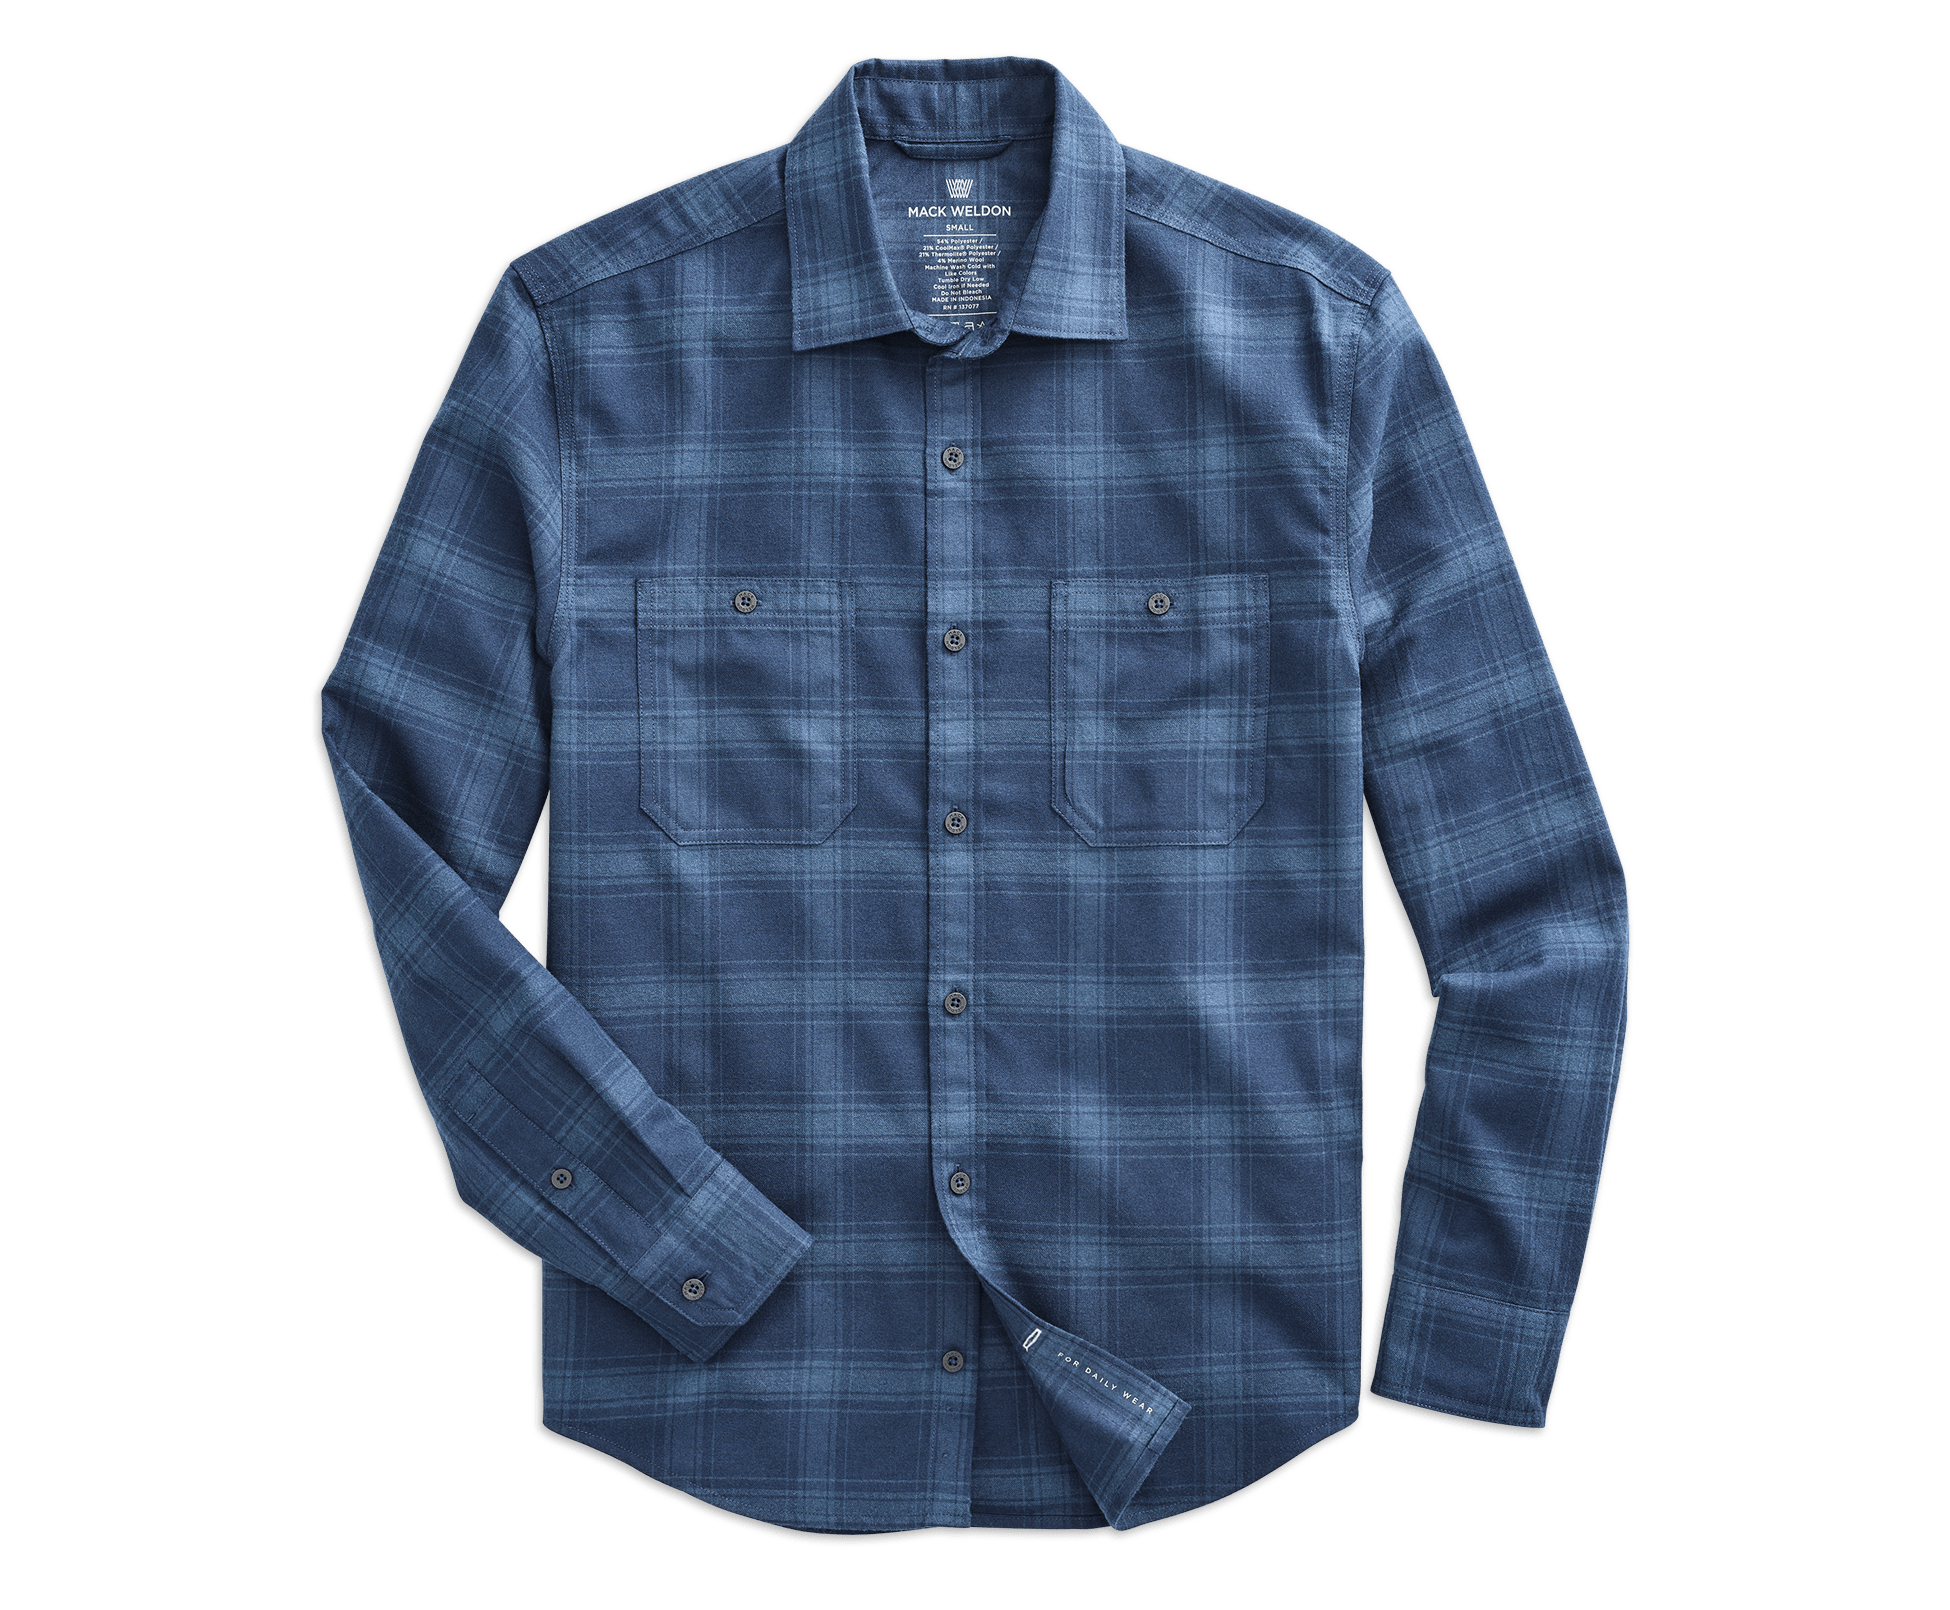 21 Flannel Shirt Outfits for Women, How to Style a Flannel Shirt